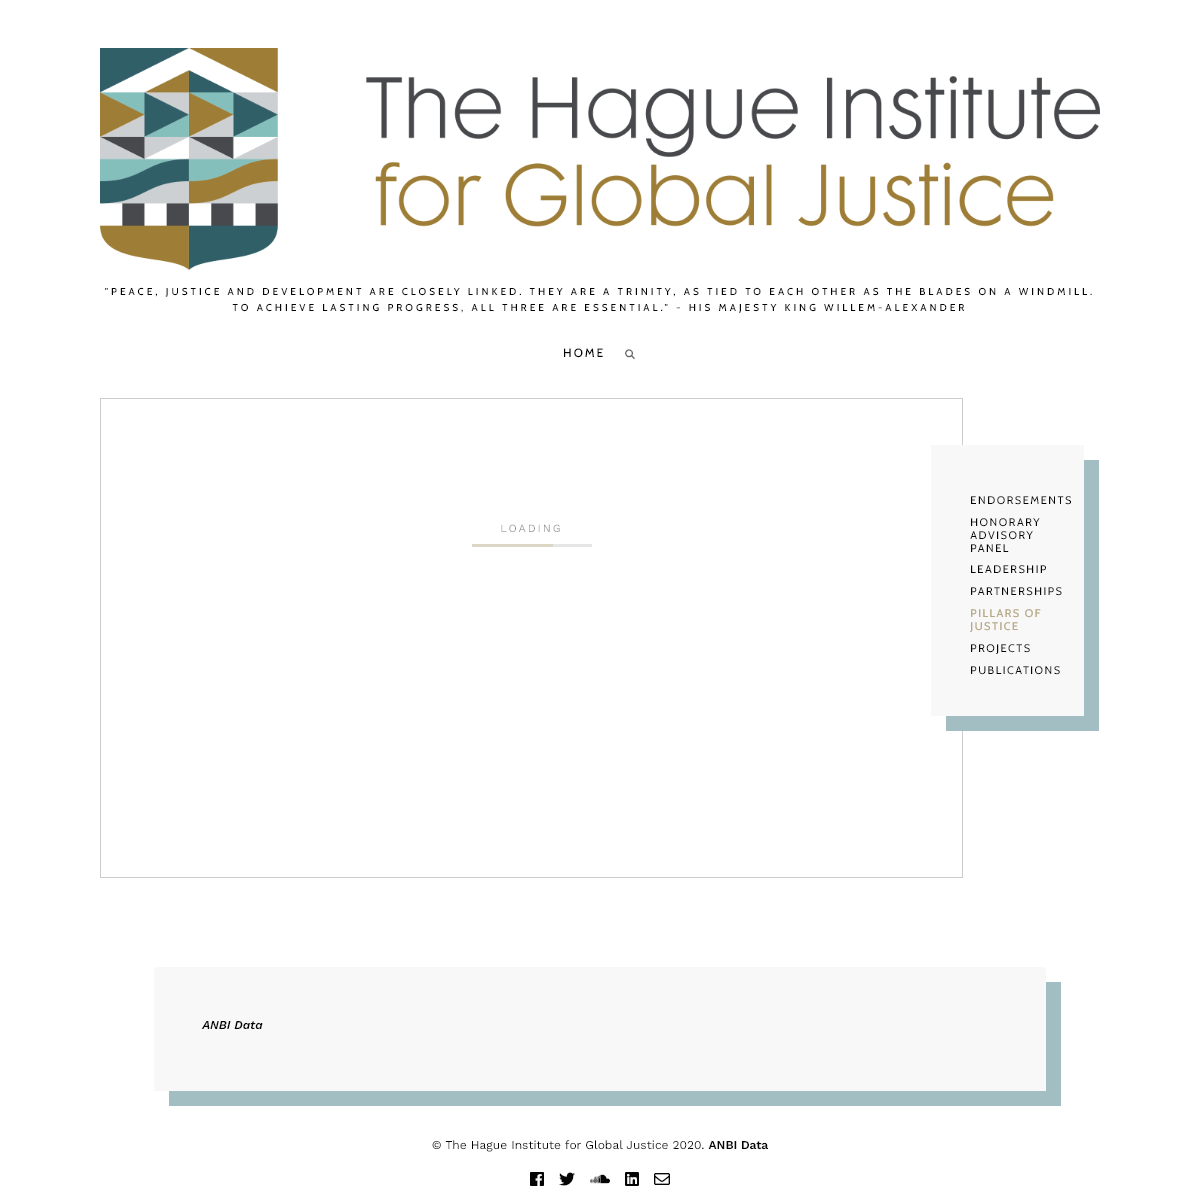 A complete backup of thehagueinstituteforglobaljustice.org